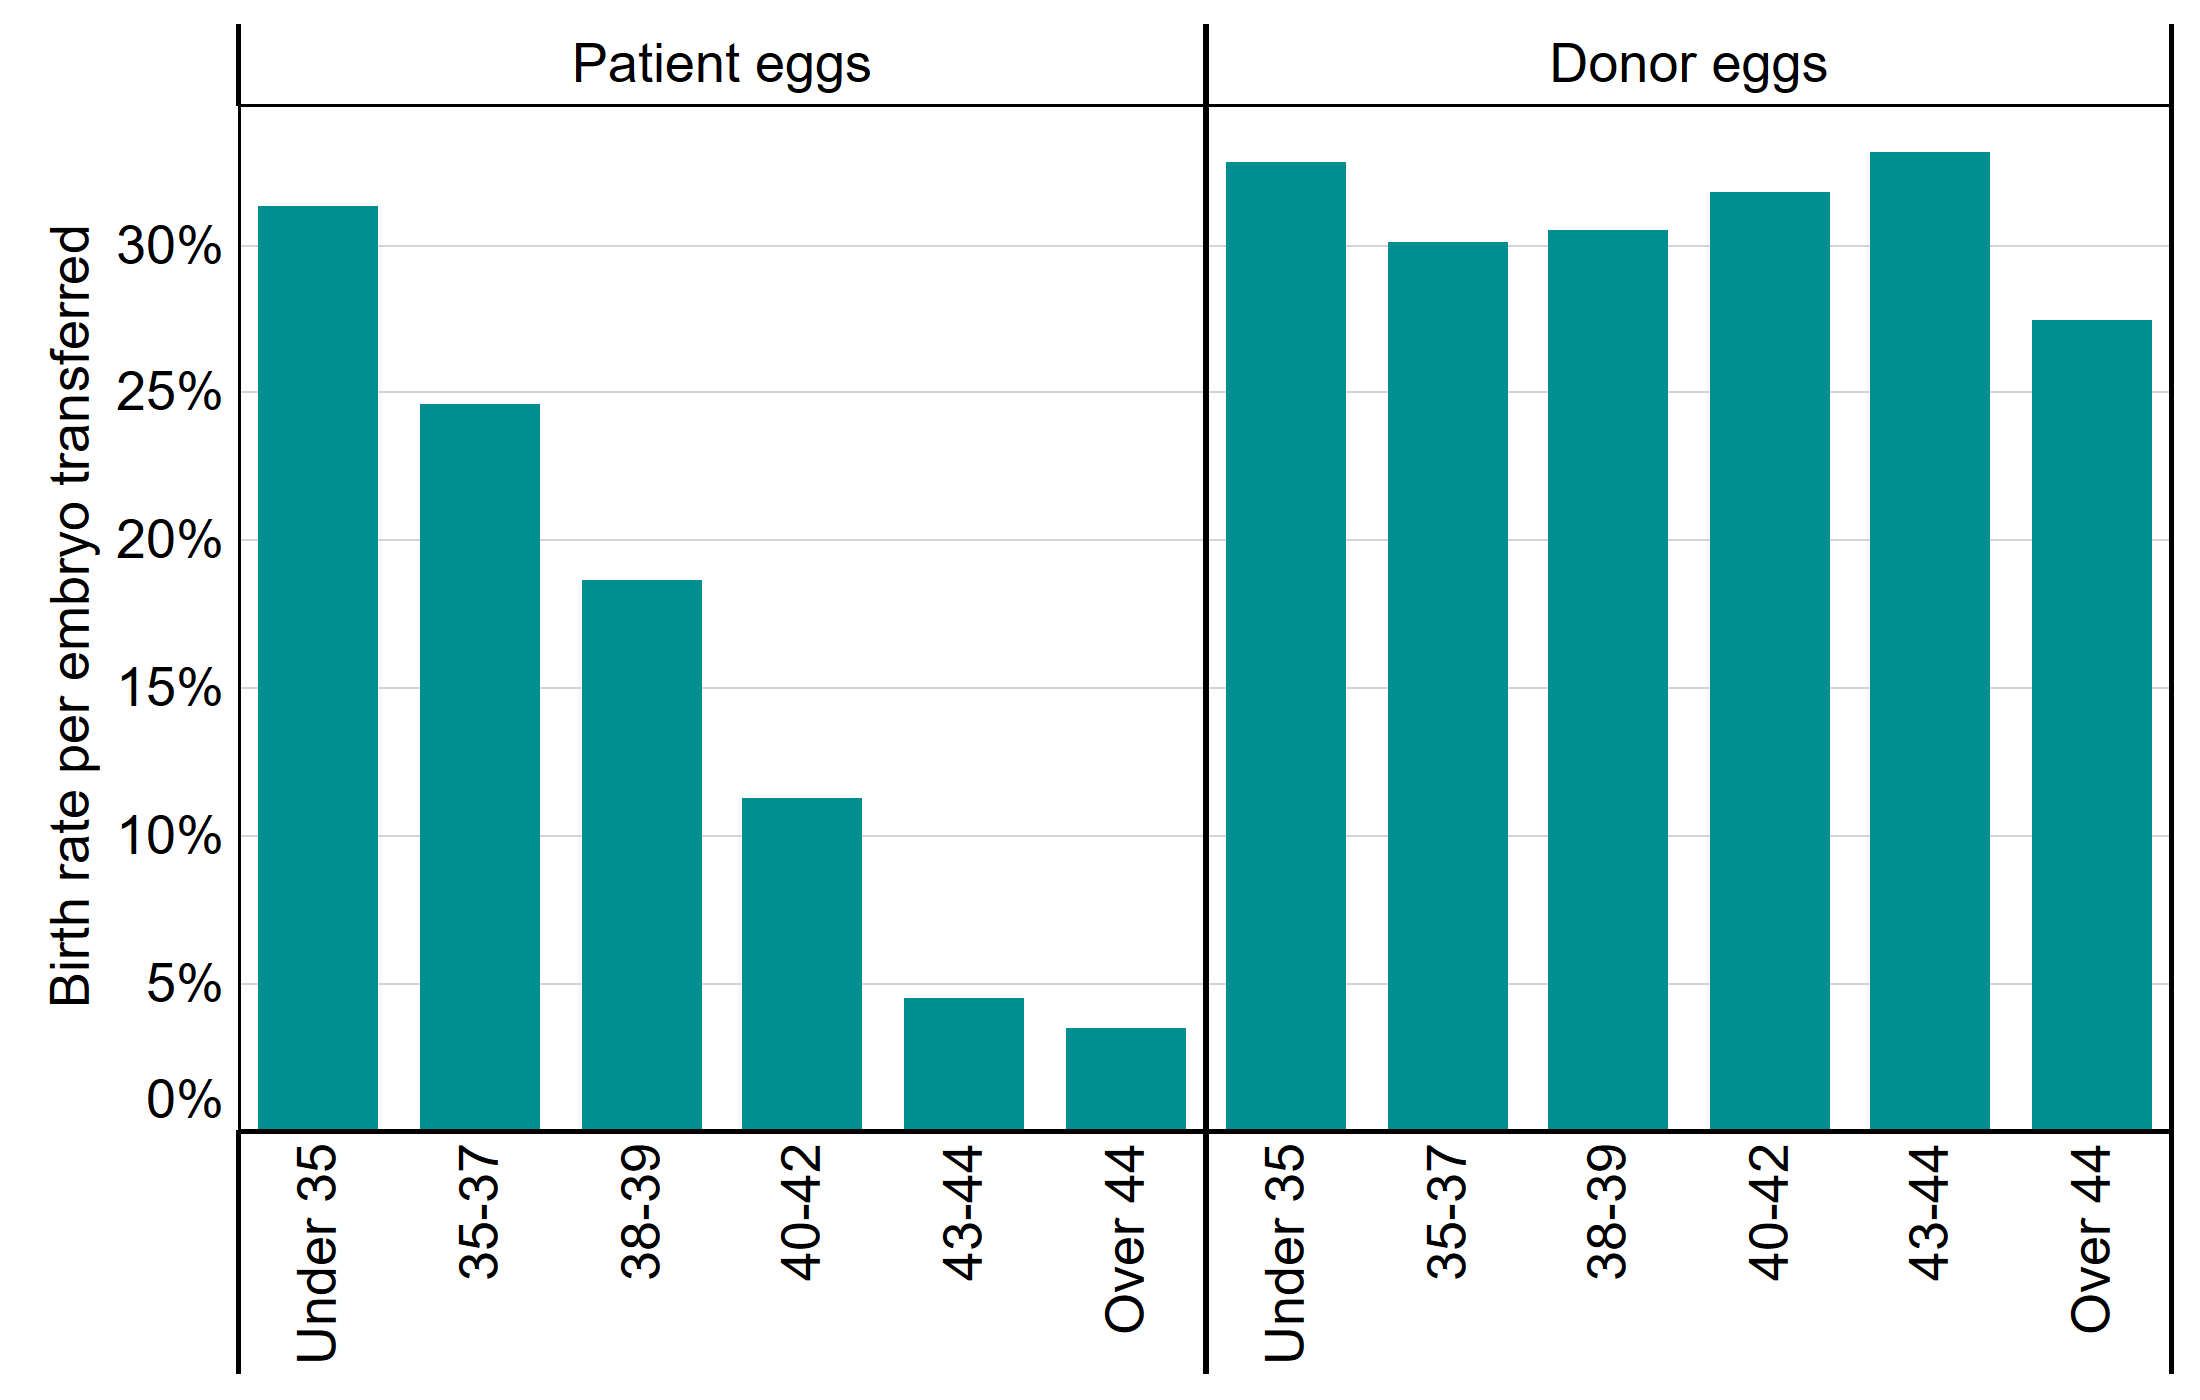 This bar chart shows the live birth rate per embryo transferred by patient age bands and source of egg (patient eggs or donor eggs). This chart shows that when using patient eggs, live birth rates per embryo transferred decrease with age from over 30% for patients under 35 to below 5% for patients 43 and over. When using donor eggs live birth rates per embryo transferred are similar for all age groups and remains above 25% per embryo transferred.